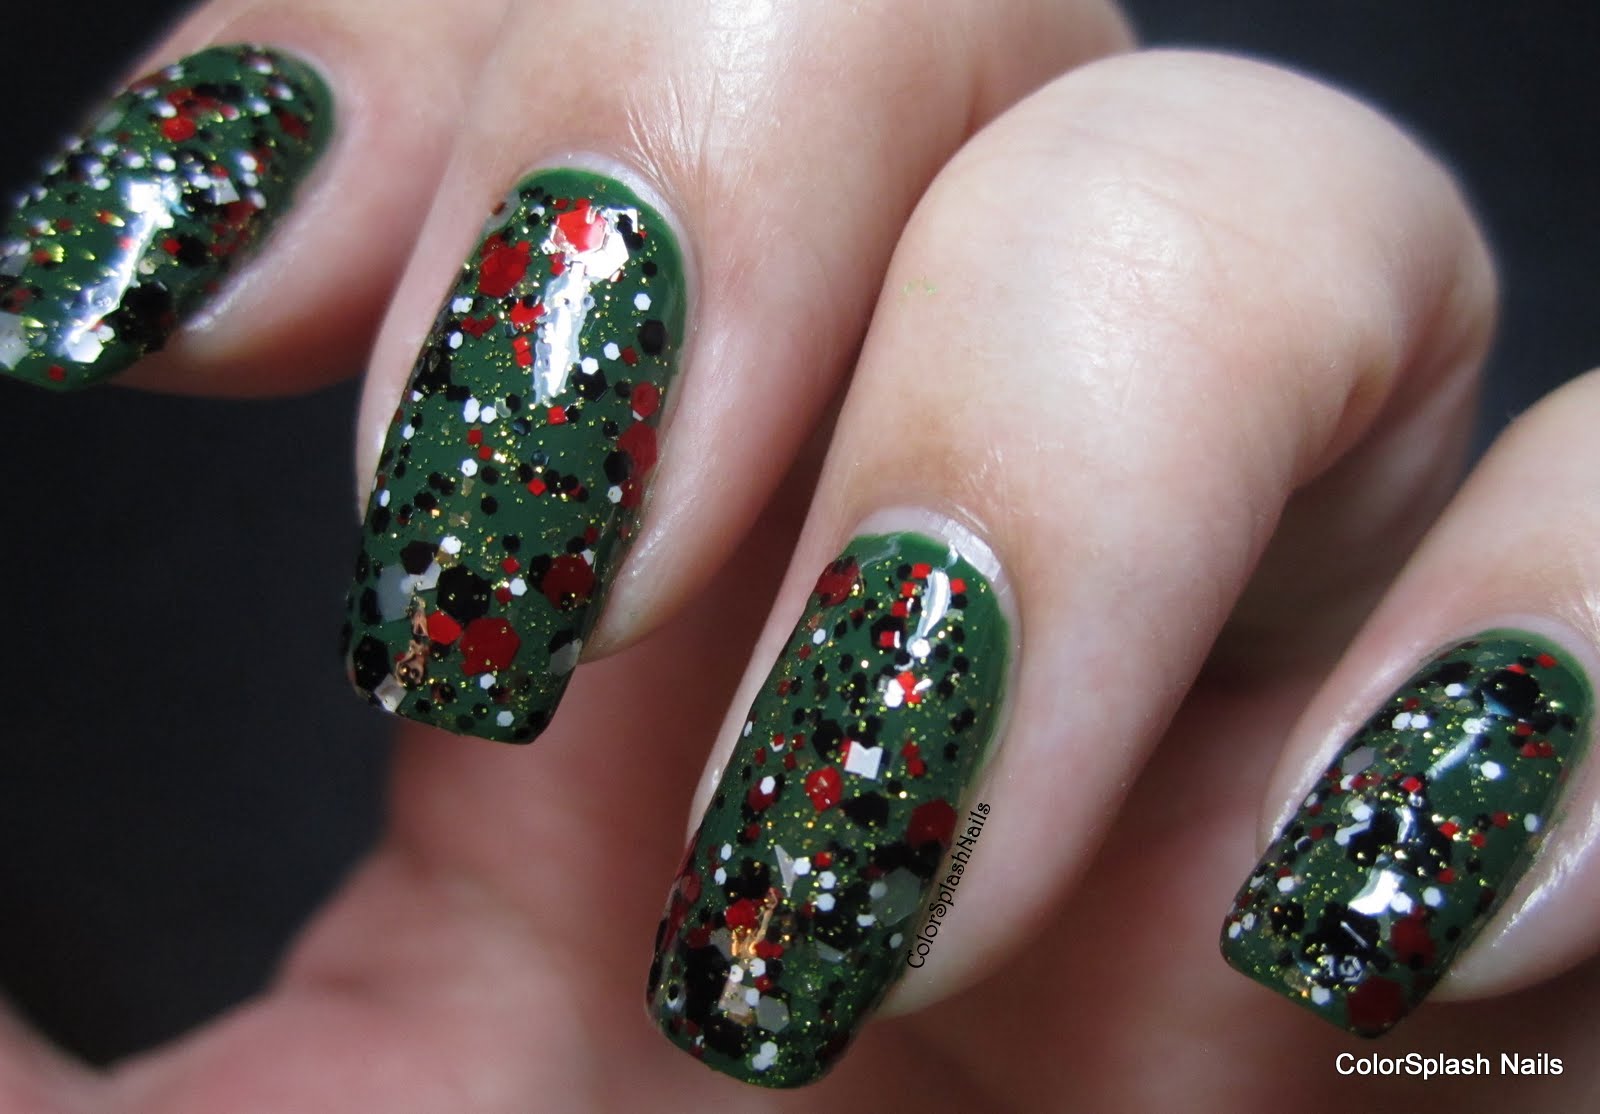 Colorsplash Nails: Liquid Sky Lacquer Christmahannukwanzaa Collection